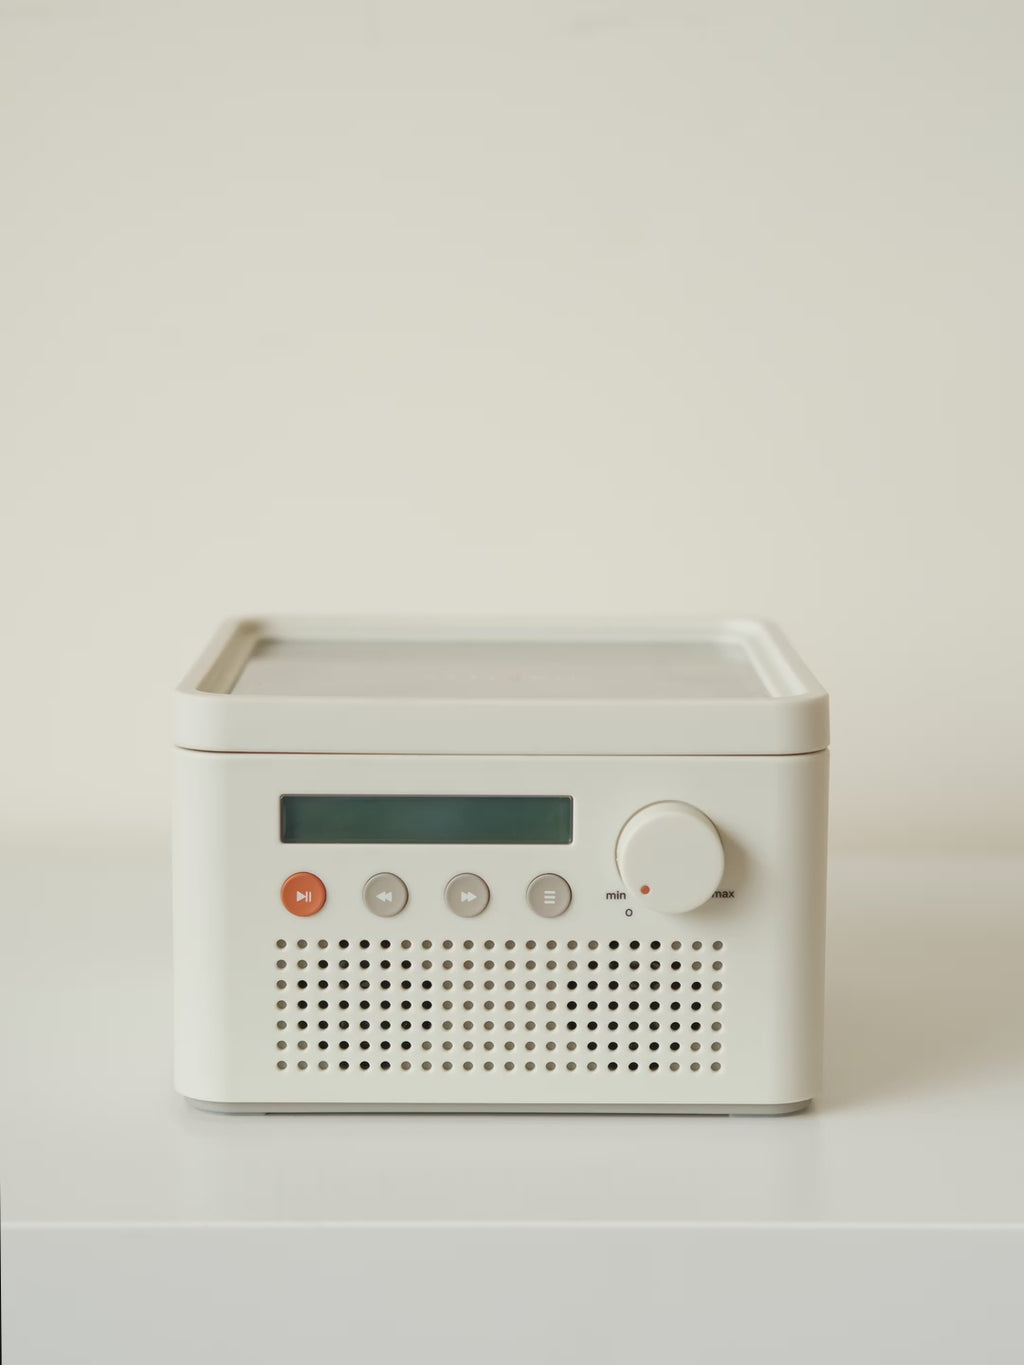 The SYITREN R200 Portable Retro CD Player Bluetooth Speaker is a compact and lightweight device that supports to play mini CDs and normal CDs on the go. It features anti-skip protection for uninterrupted playback, multiple playback modes including repeat and shuffle, a headphone jack for private listening, and an LCD display for easy navigation.